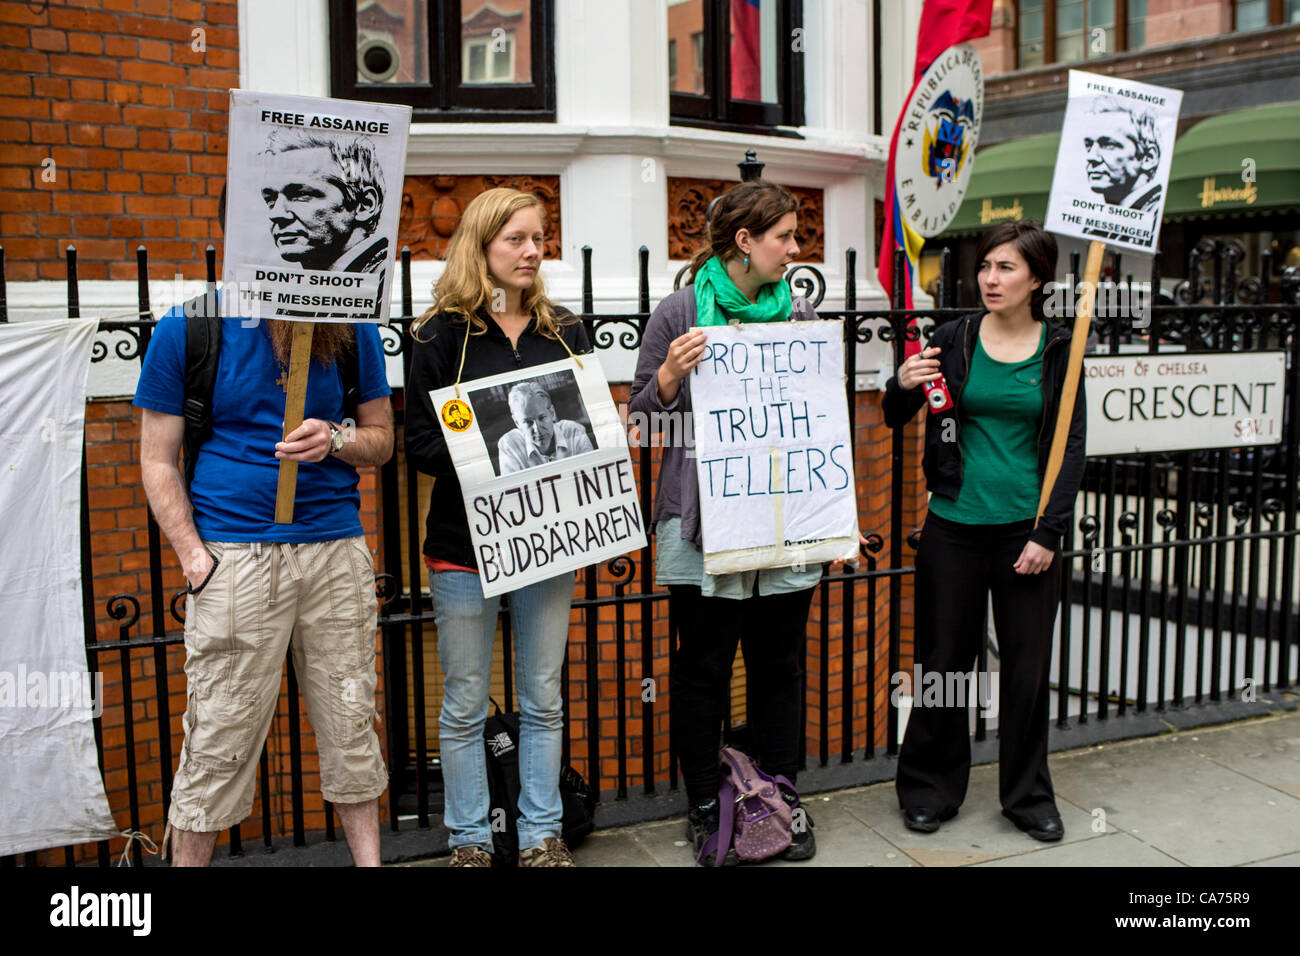 London, UK. 20th June, 2012. Protestors outside of the Ecuadorian Embassy in London. The Wikileaks Founder Julian Assange is there to seek asylum to Ecuador. Stock Photo